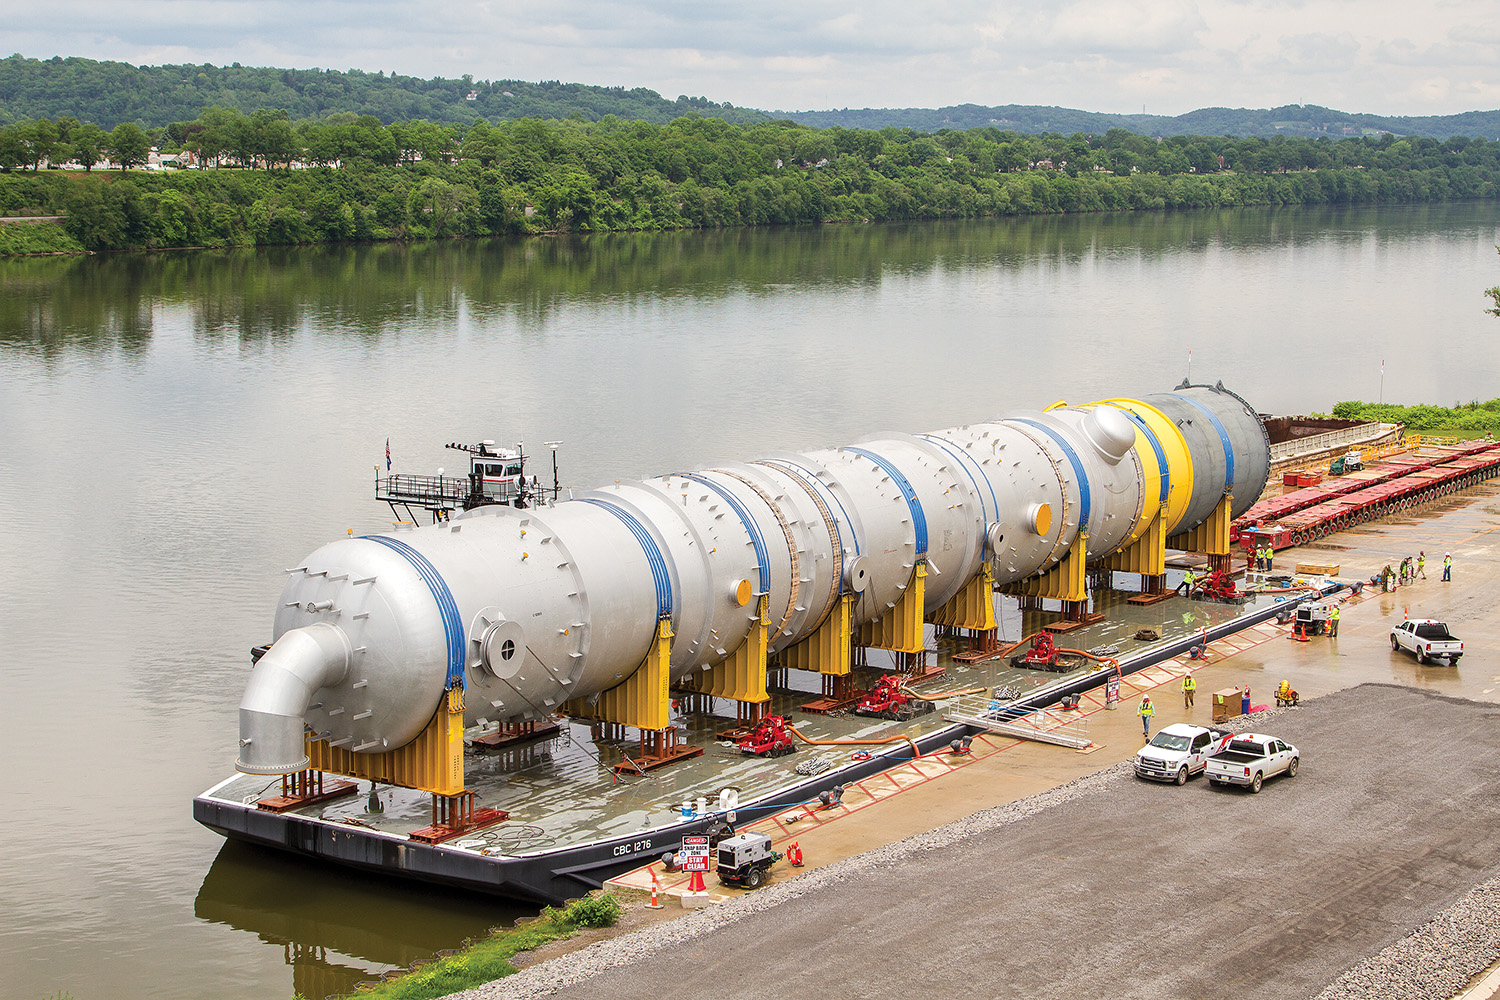 The mv. Big Eddie of Crosby Marine is seen at Monaca, Pa., Mile 27.9 of the Ohio River, on May 30 with a deck barge carrying a large refiner vessel for the Shell Oil Corporation ethylene cracker plant under construction. The picture shows the pumps used to level the barge for unloading, and the heavy-duty flatbed carrier to transport the equipment to the construction site. (Photo by Eric M. Johnson)